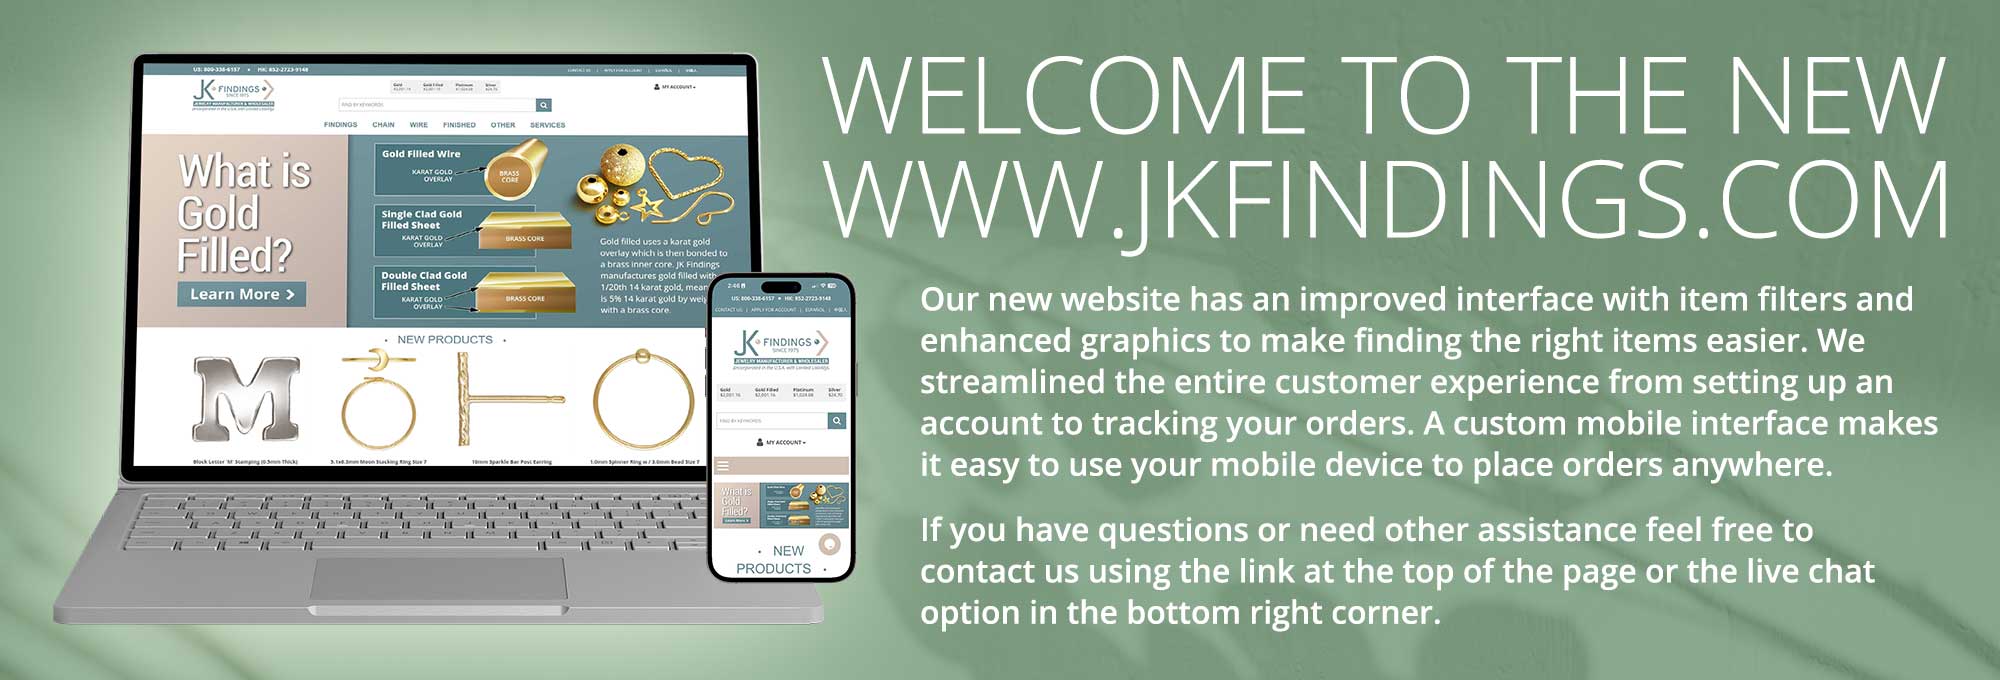 Welcome to the New www.jkfindings.com